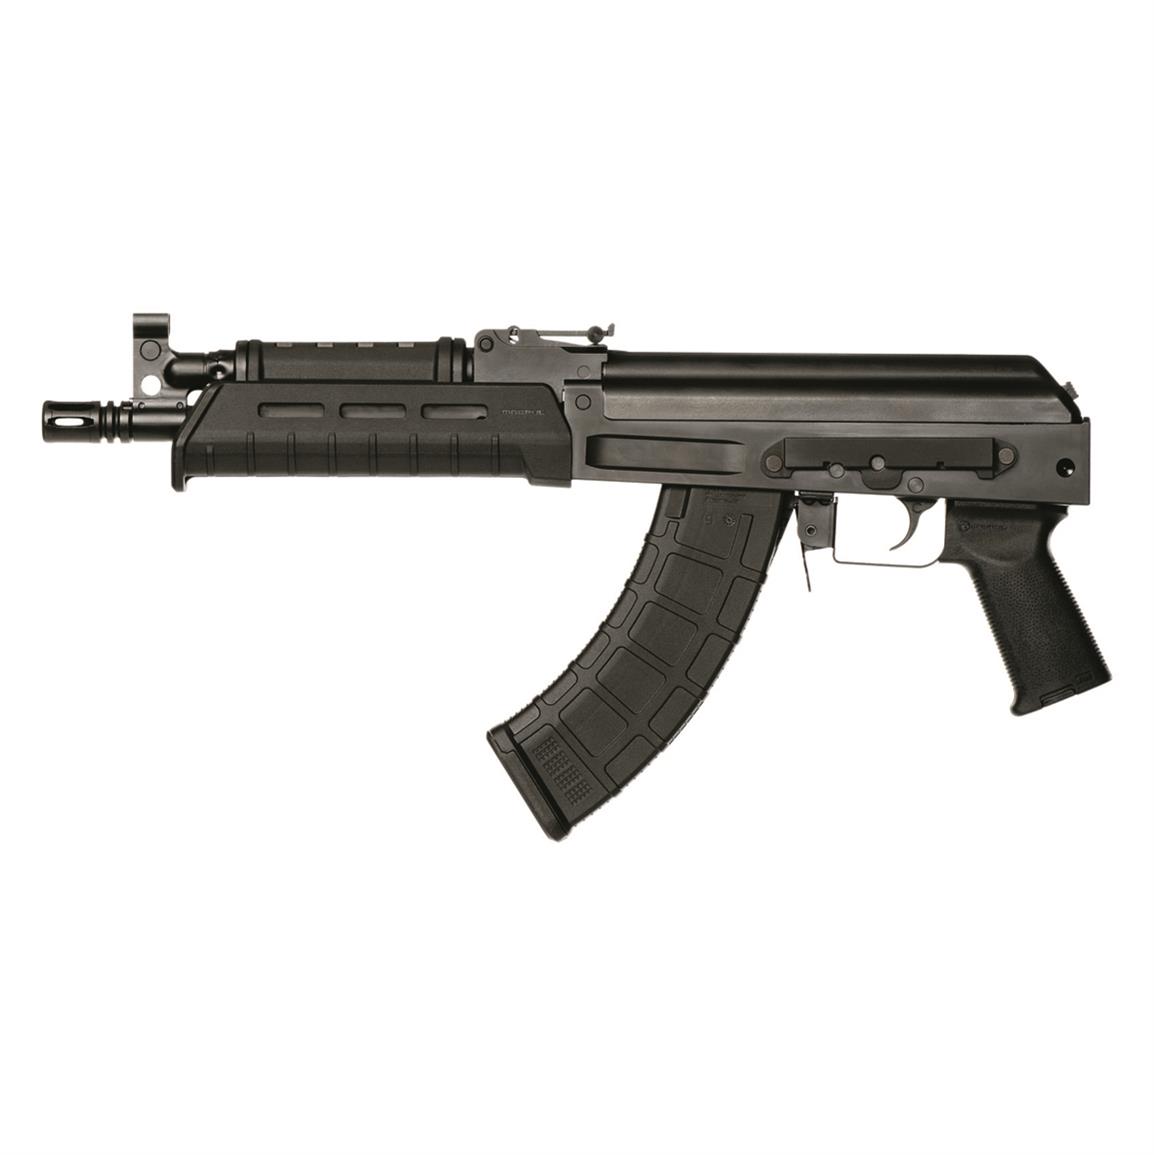 Century Arms C39v2 Pistol, Semi-automatic, 7.62x39mm, 10.6" Barrel, Milled, 30+1 Rounds